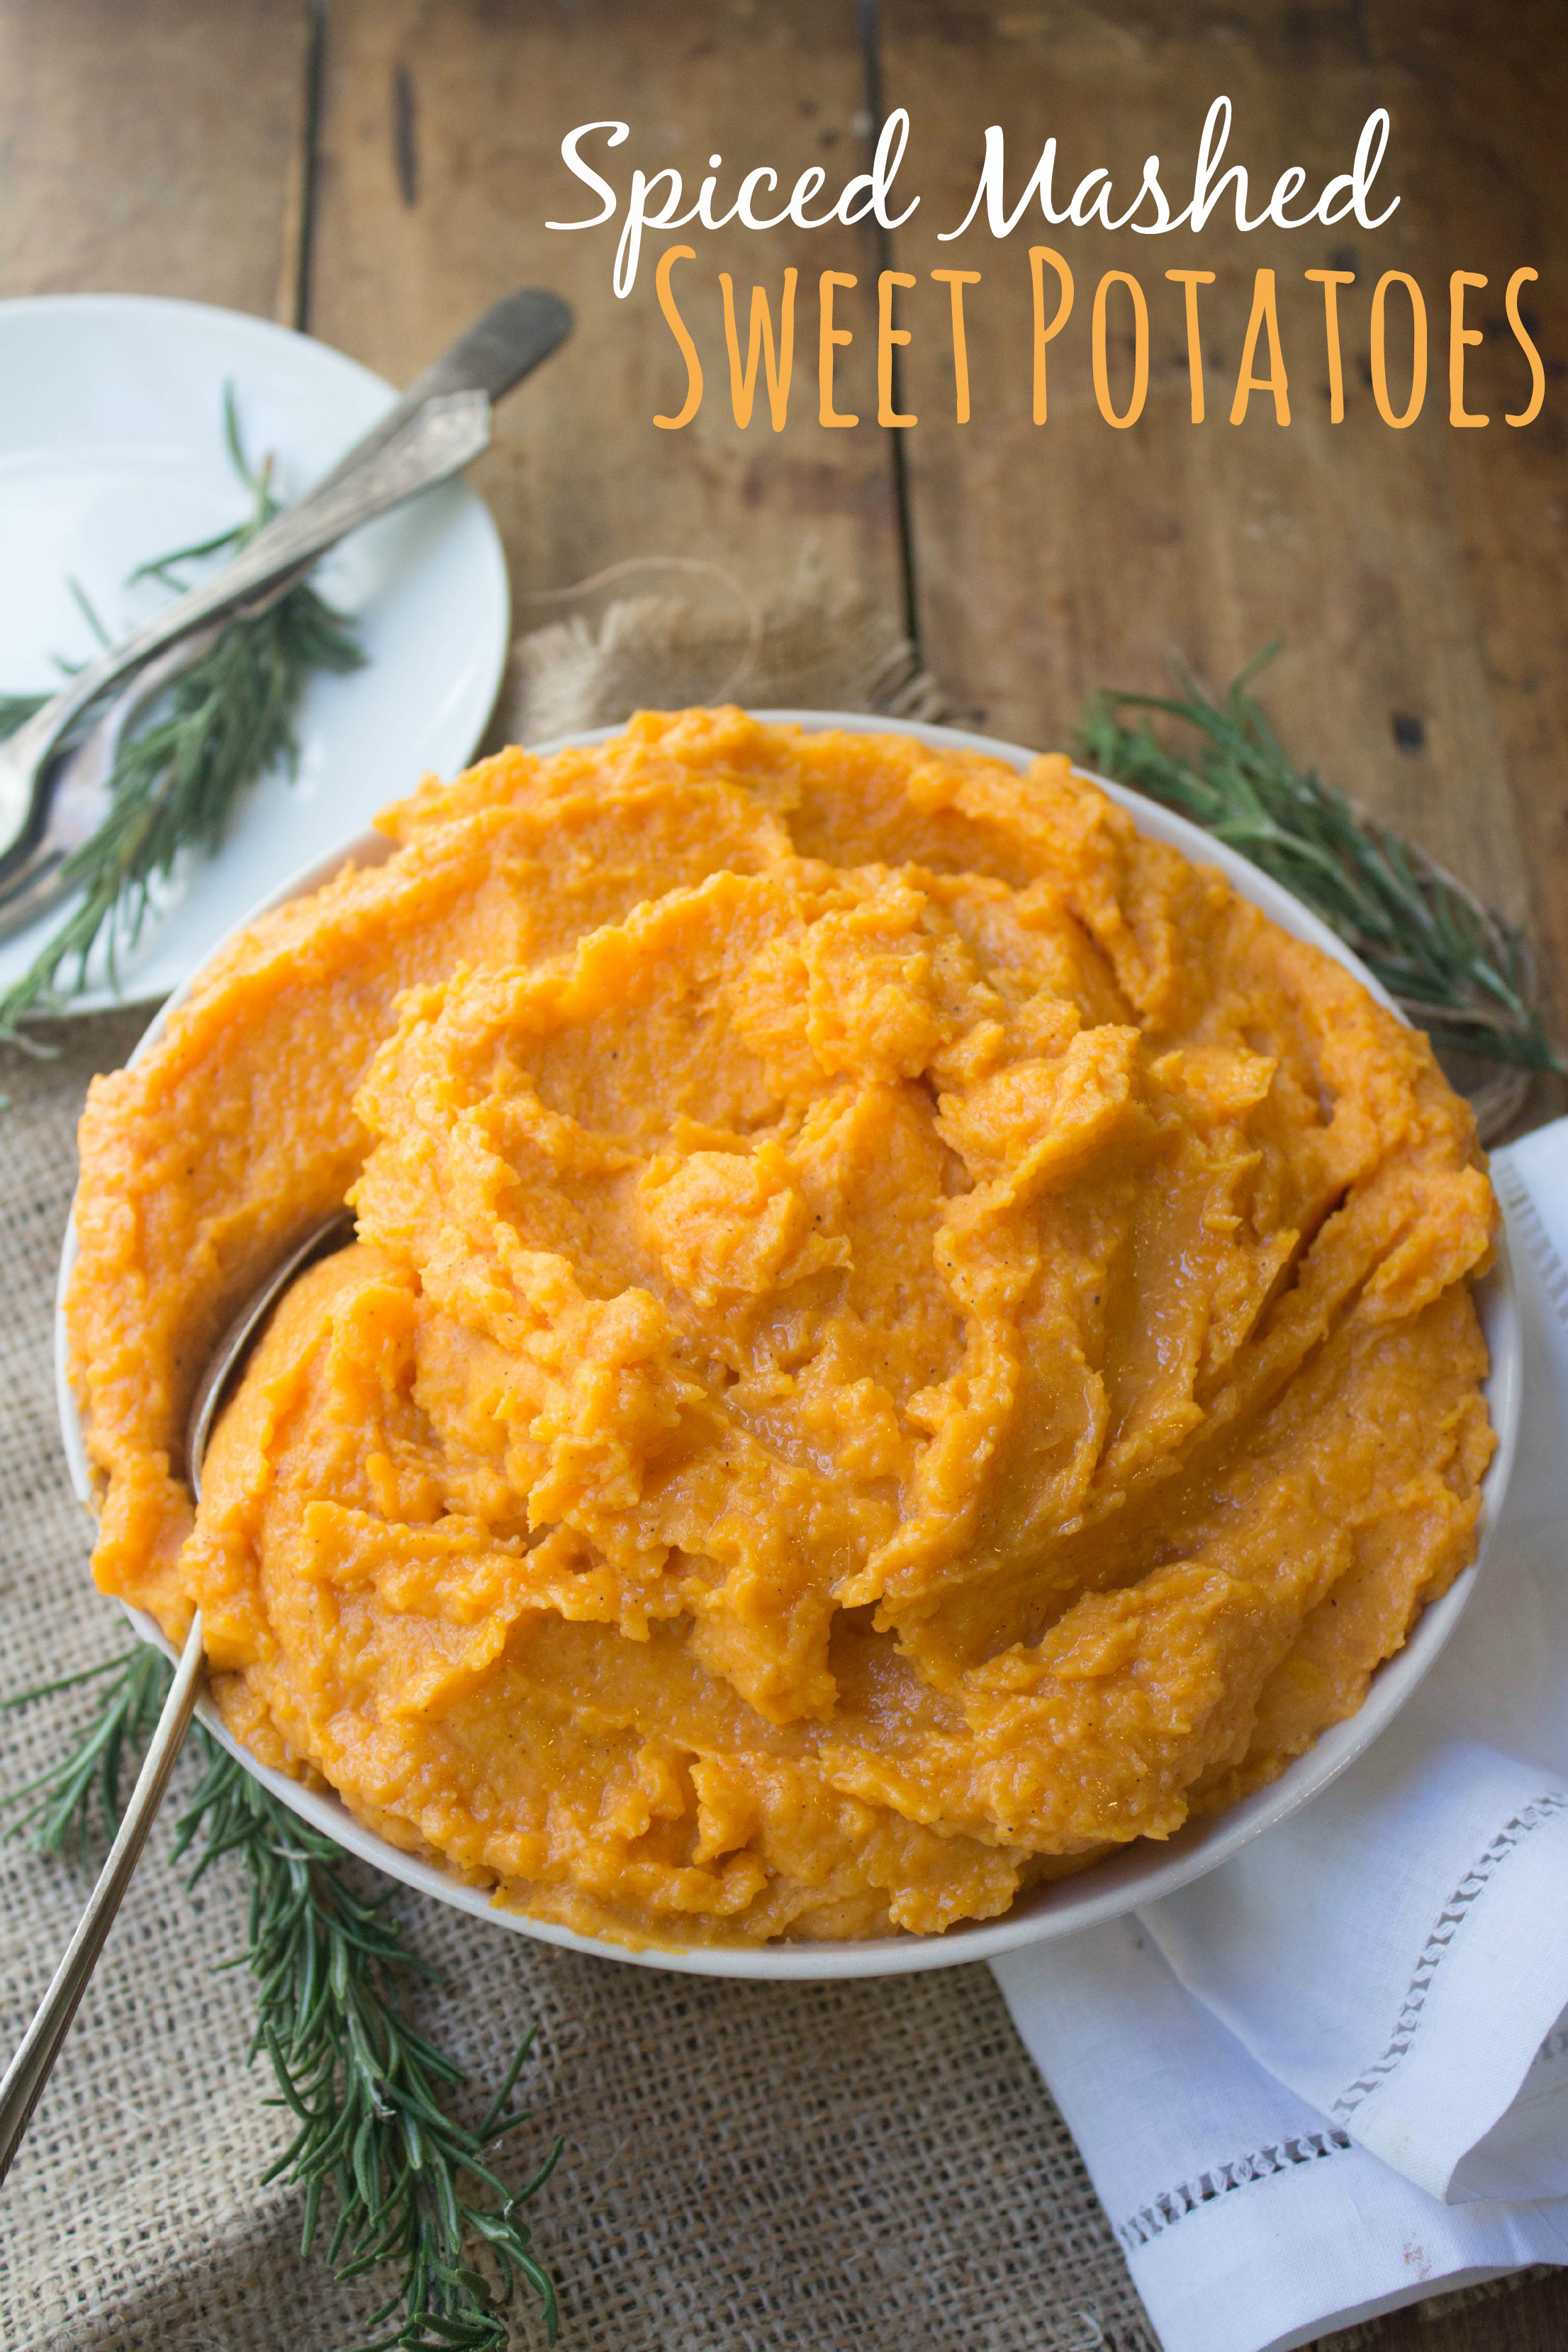 Mashed Sweet Potatoes Recipe Healthy 20 Of the Best Ideas for Spiced Mashed Sweet Potatoes